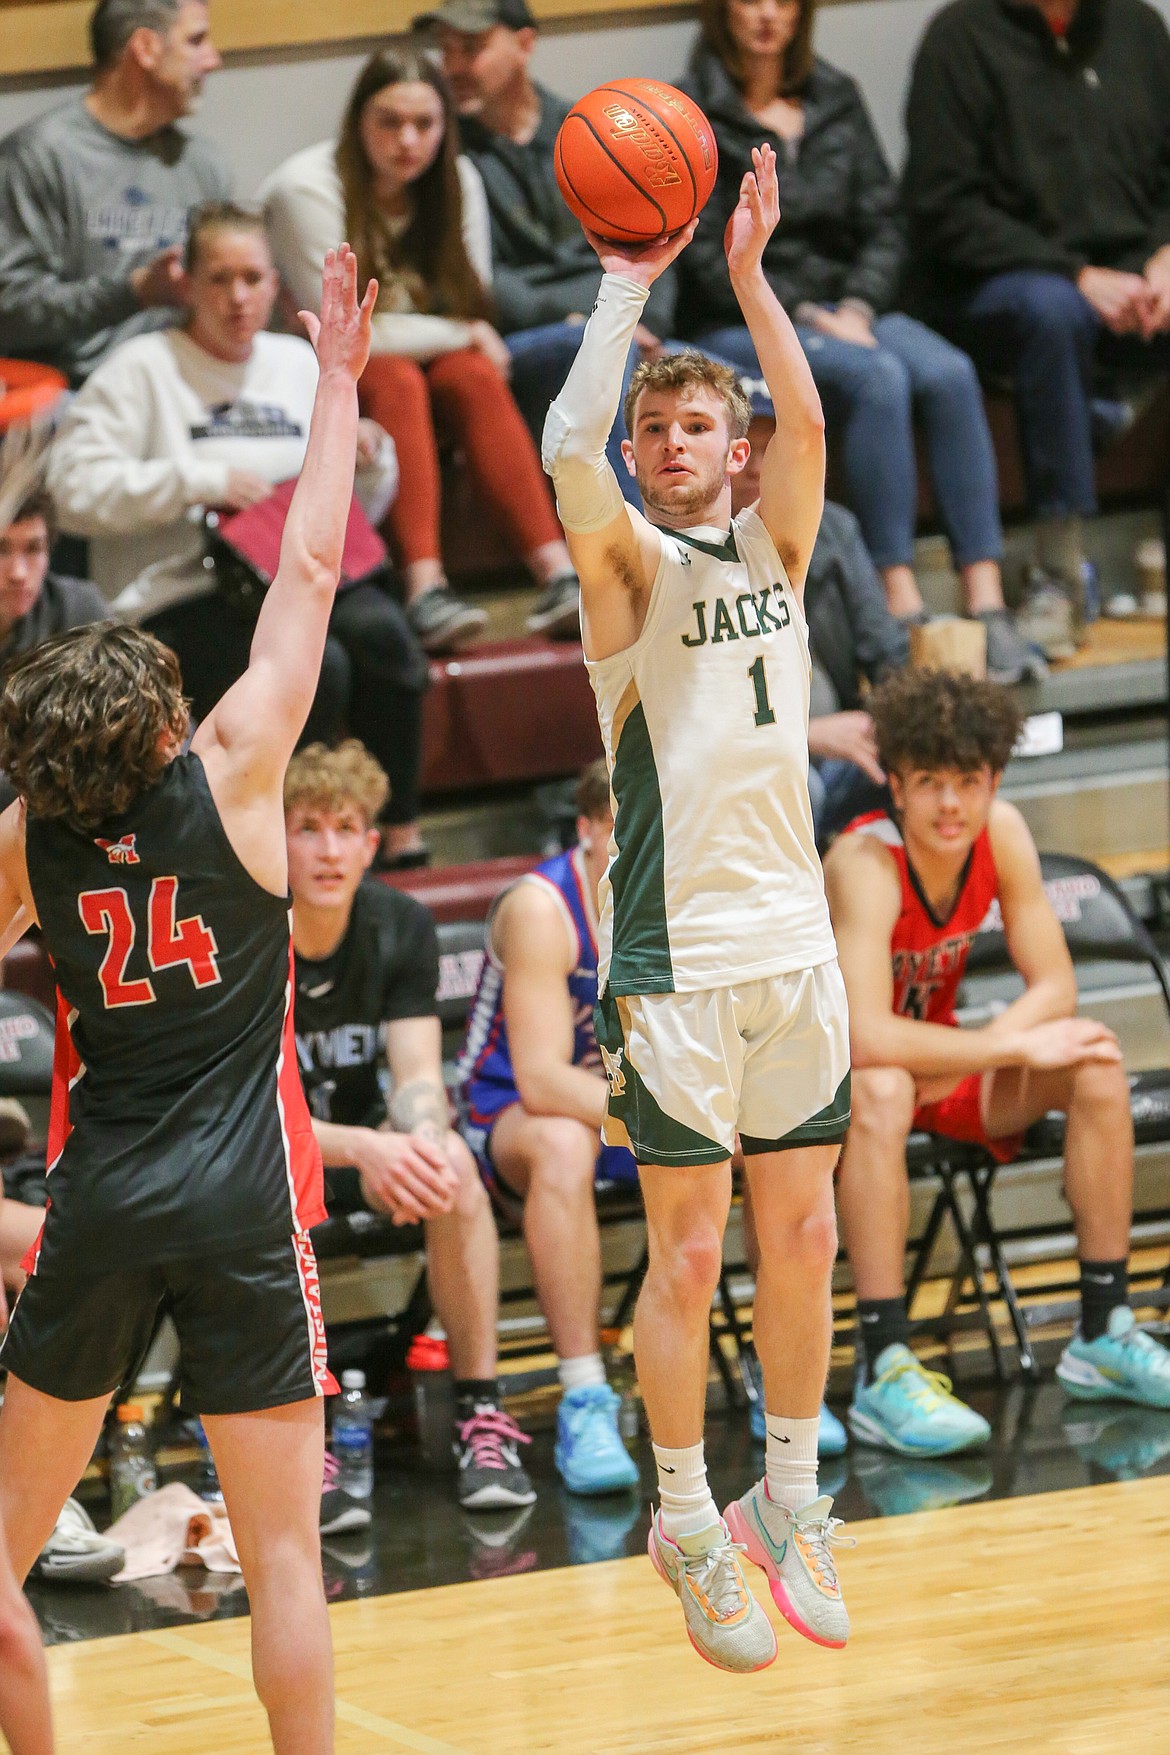 JASON DUCHOW PHOTOGRAPHY
St. Maries guard Greyson Sands puts up a 3-pointer during the first half of Saturday's boys Idaho High School All-Star Game at North Idaho College.